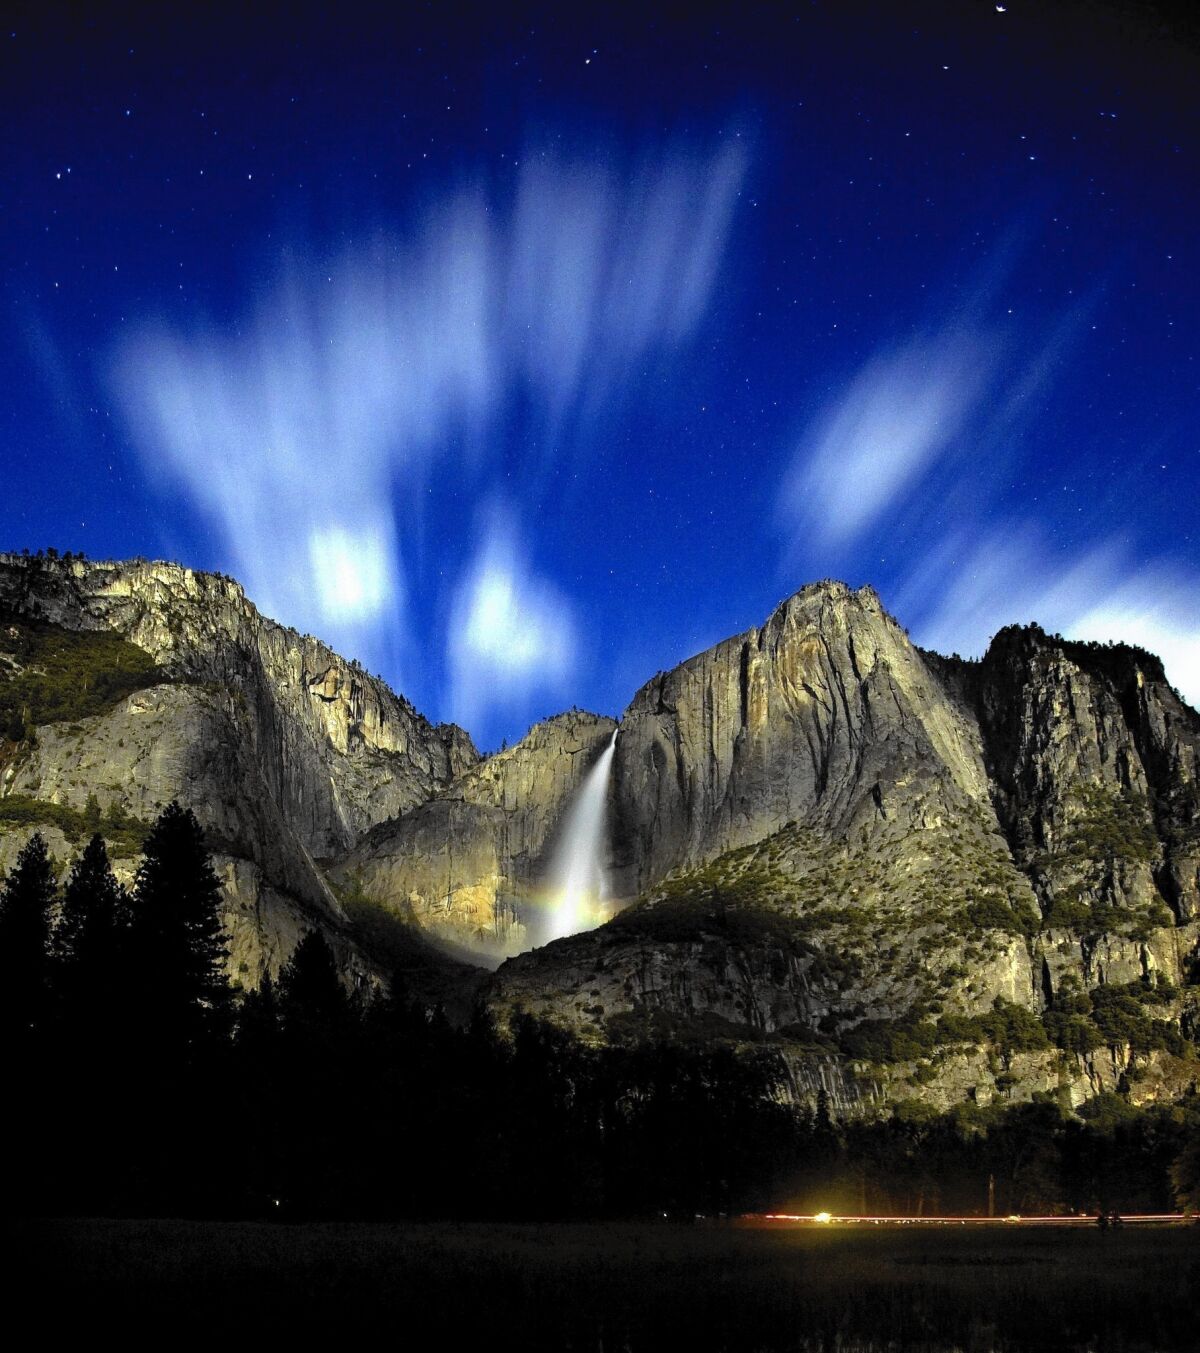 The base of Upper Yosemite Falls during a 30-second exposure. John Muir was instrumental in preserving the Yosemite Valley.